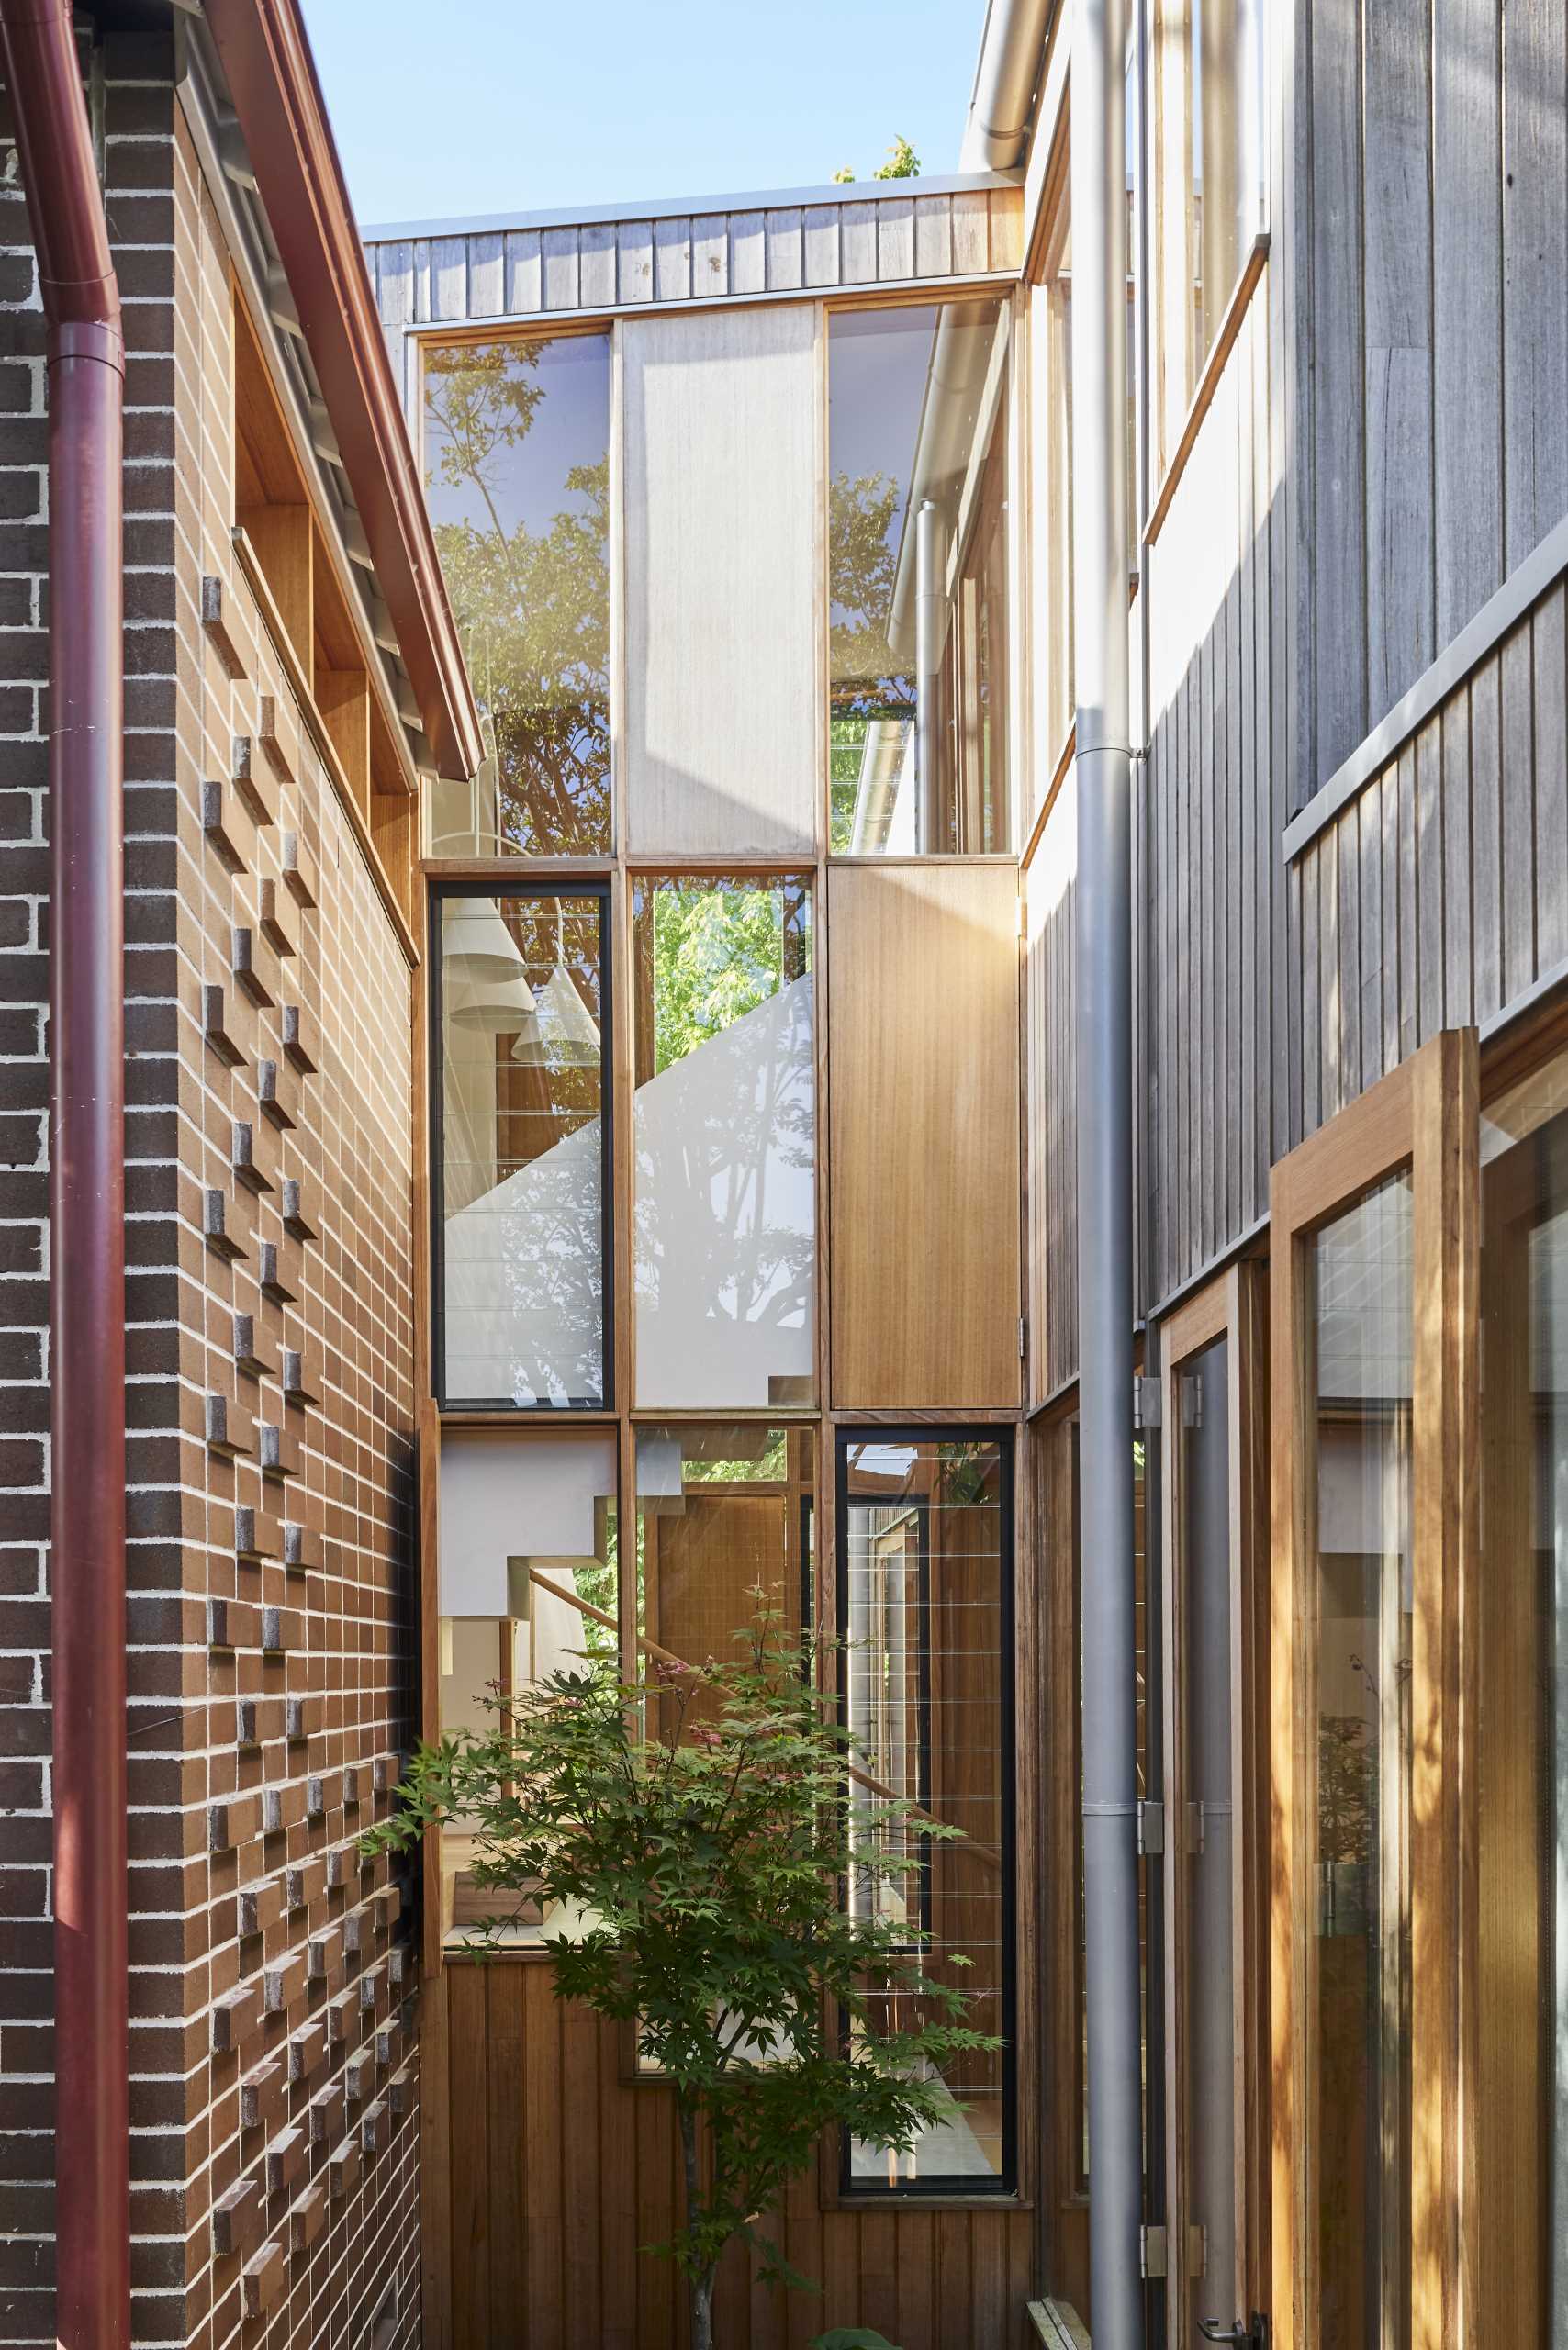 A new home extension designed for an Australian house in a heritage conservation area.